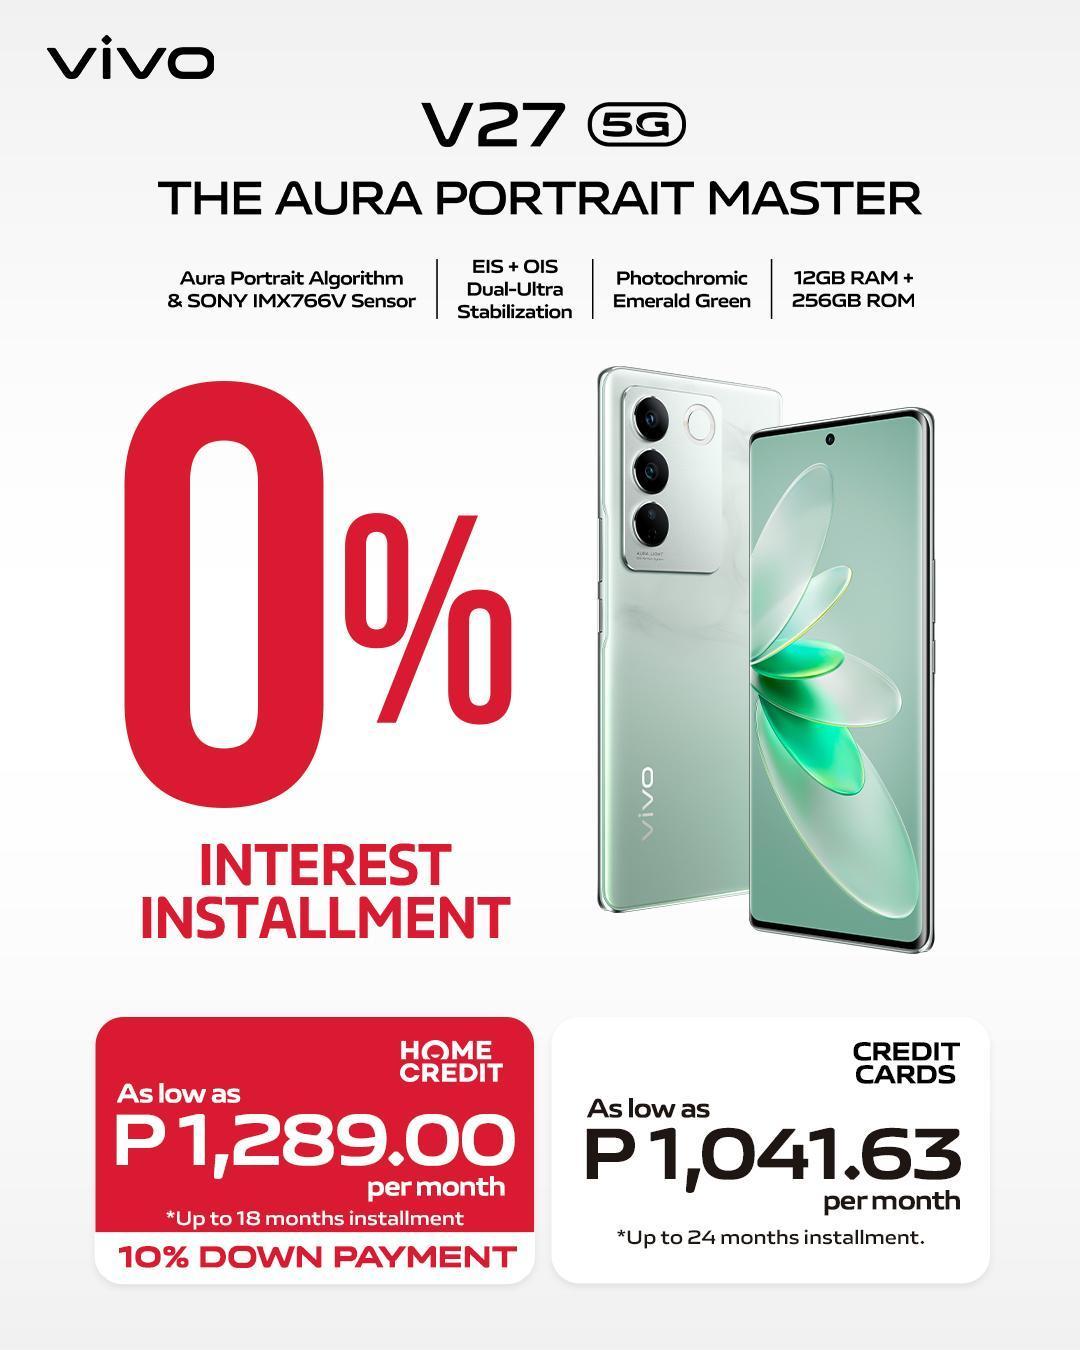 Heads-up, Folks! You Can Now Take Home the #AuraPortraitMaster vivo V27 Series via Credit Cards, Home Credit